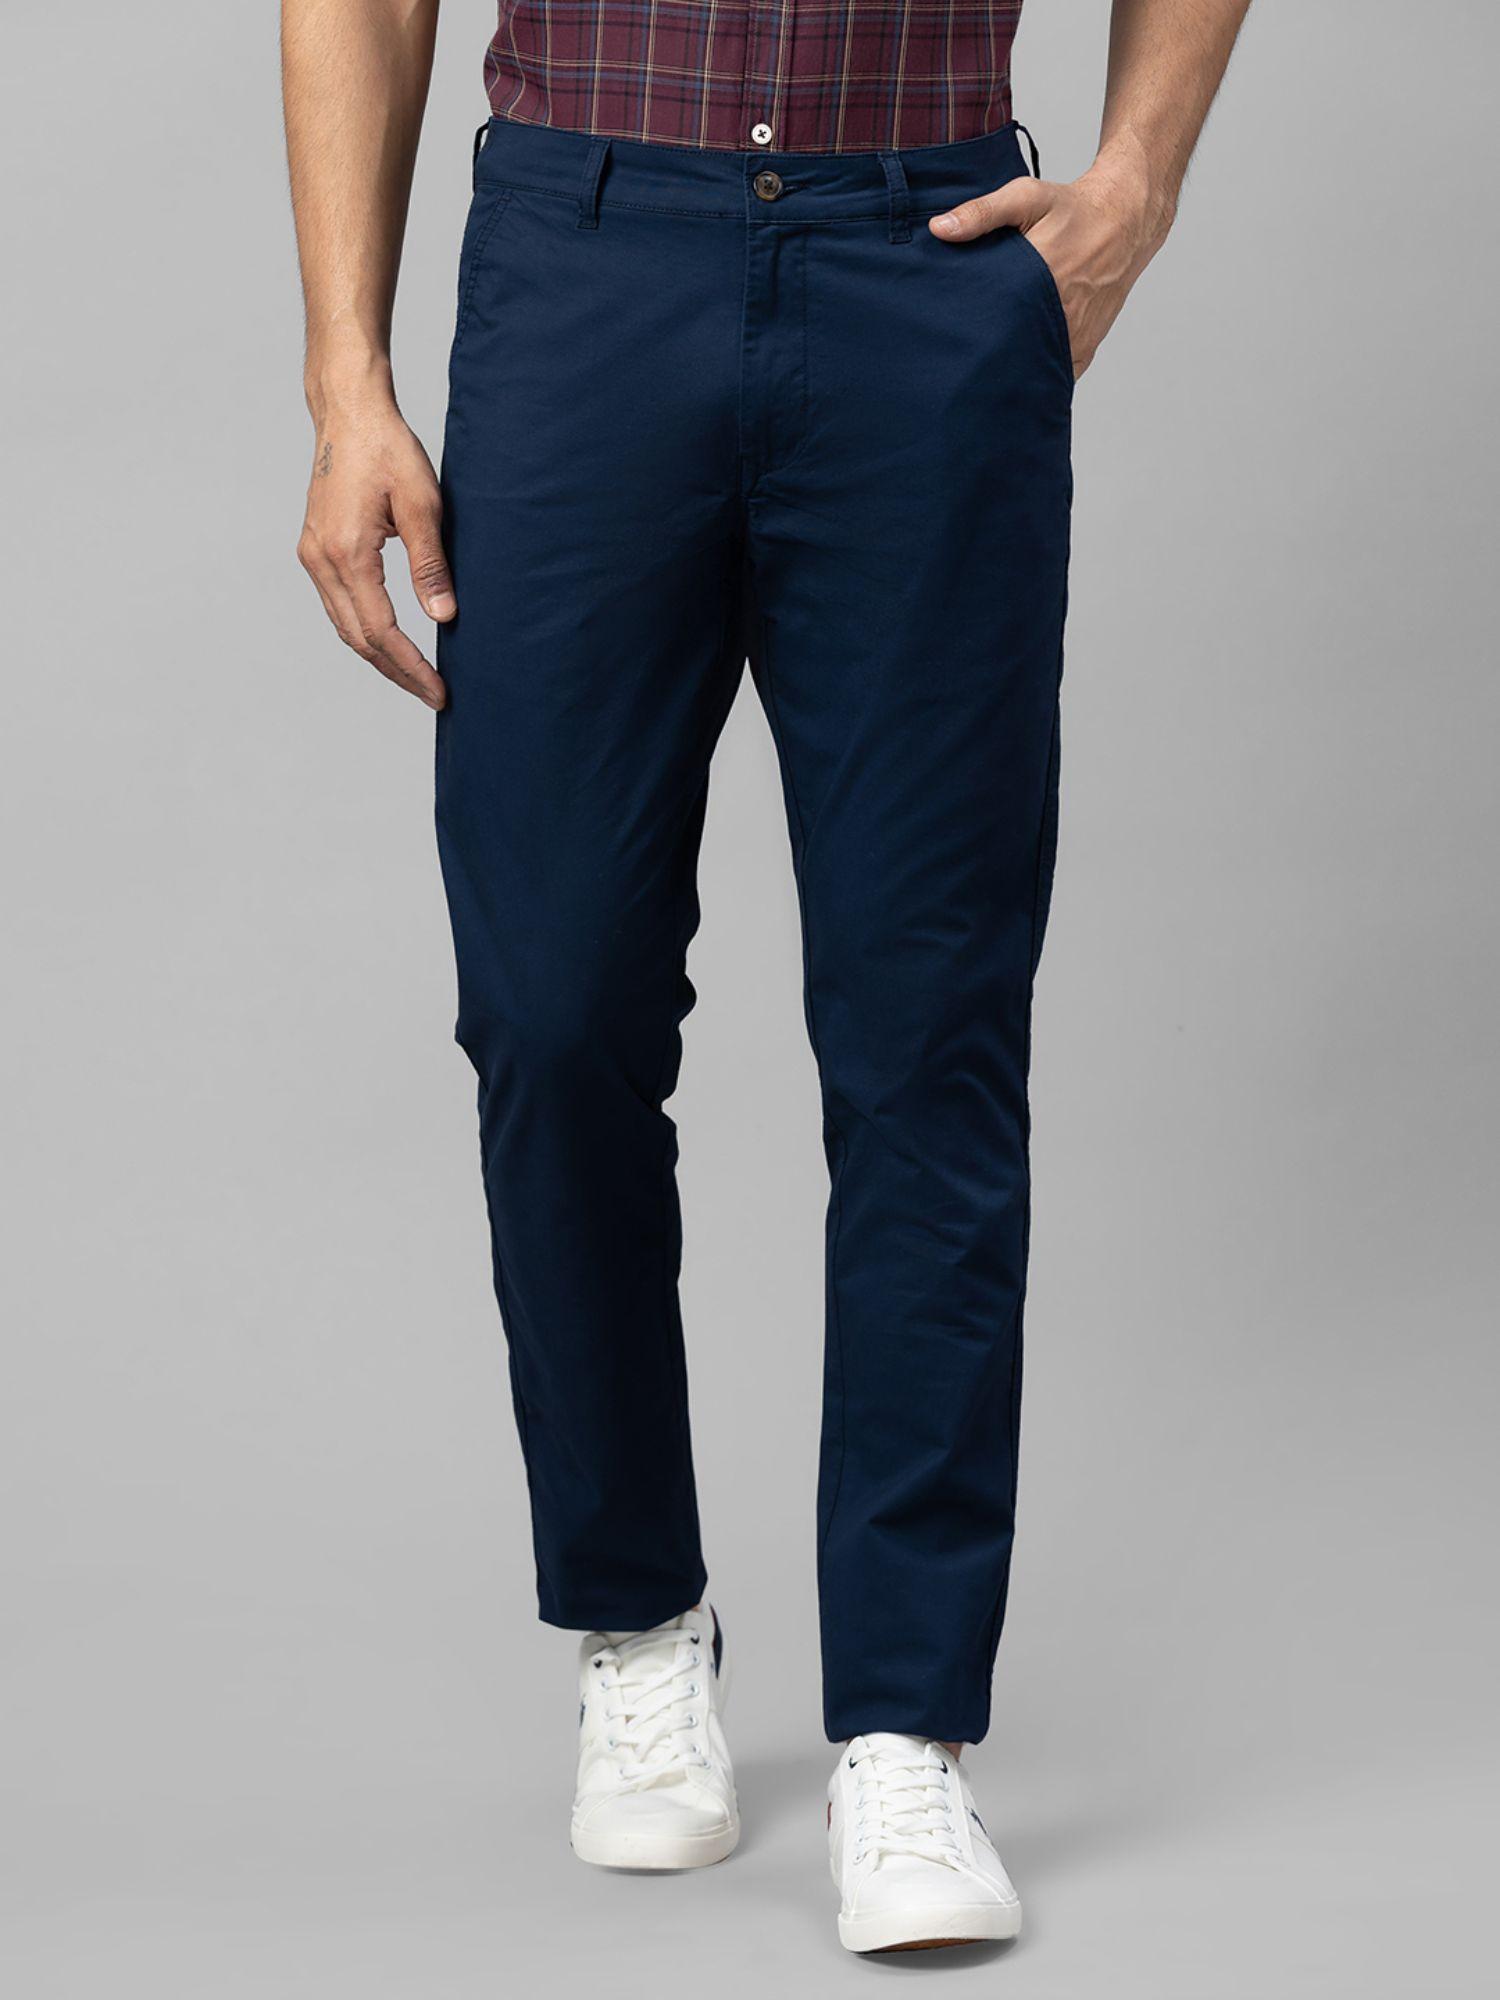 navy solid slim fit casual chinos